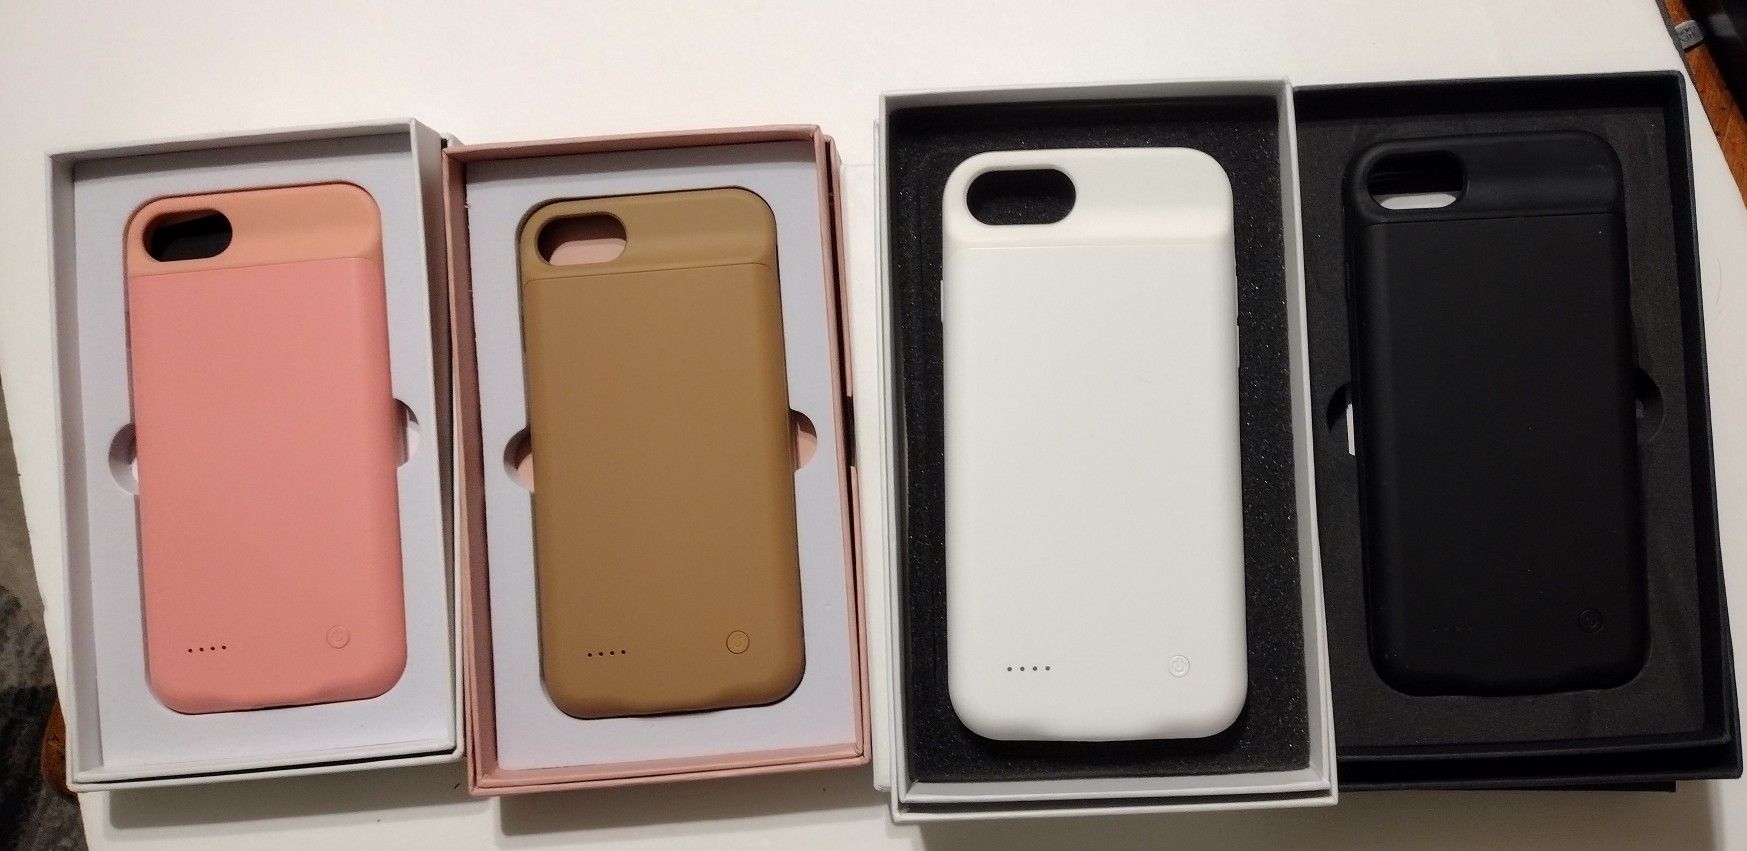 Battery Case For iPhone 6/7/8 $15 Each 